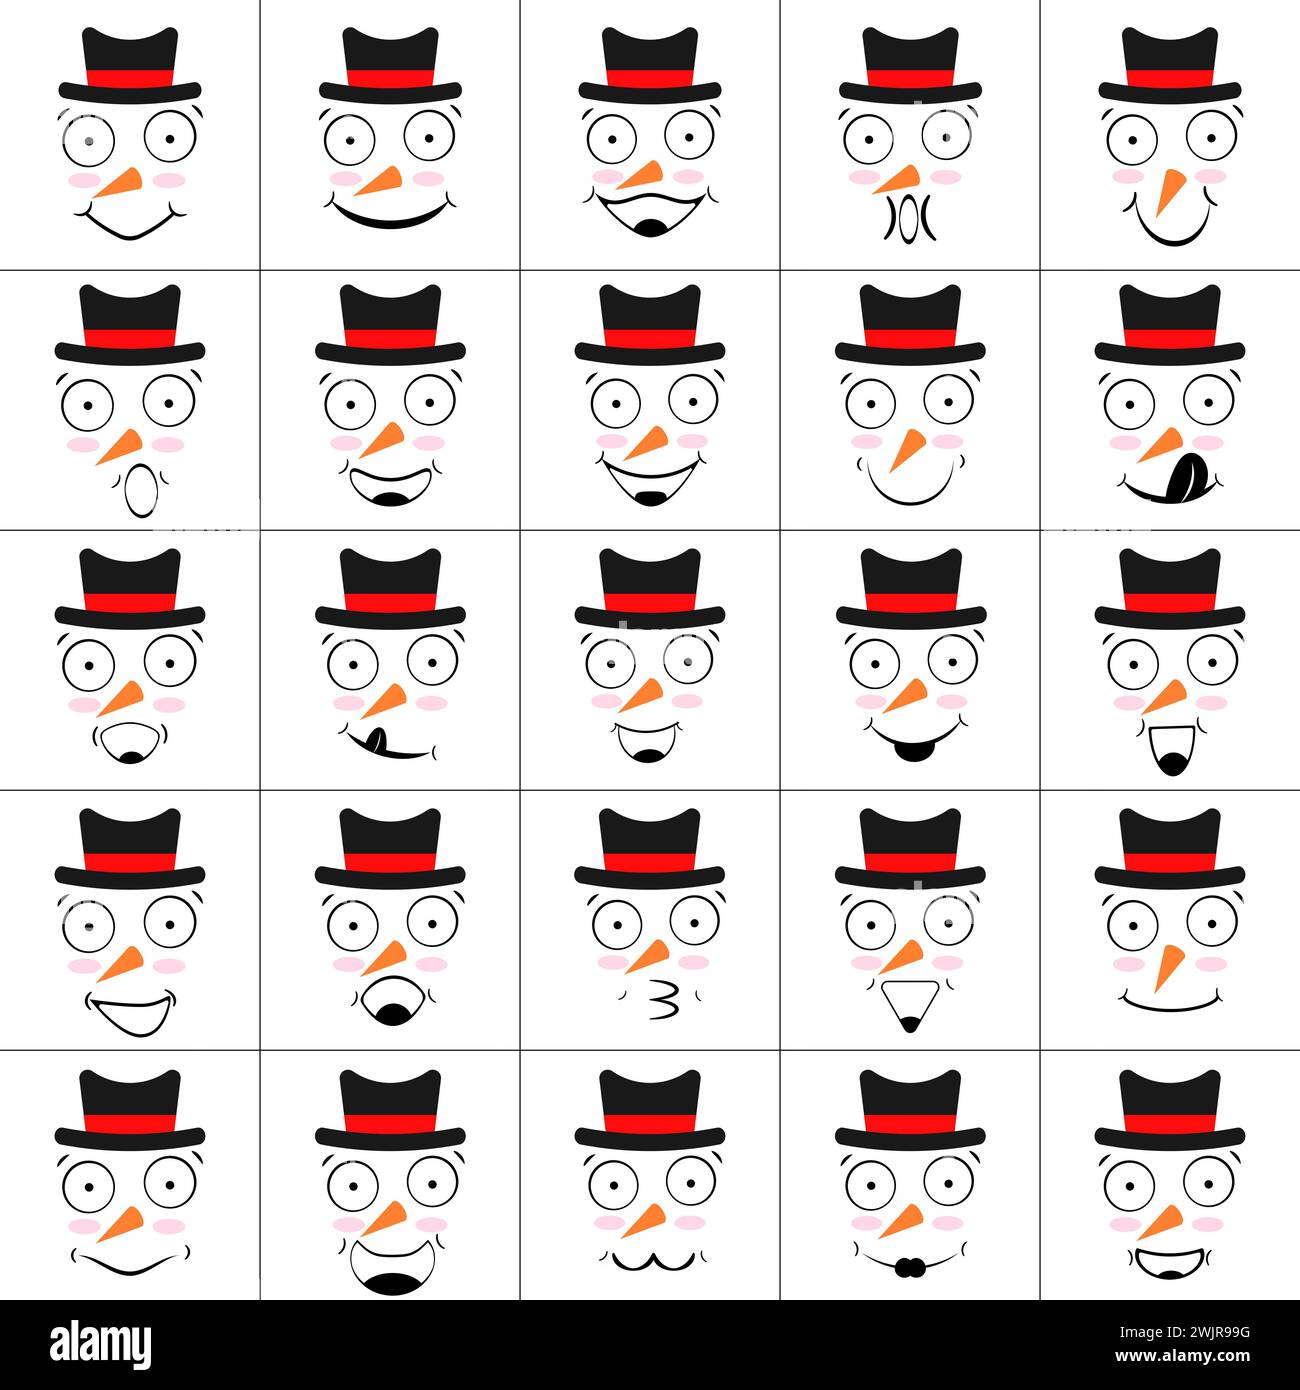 Set of faces of snowmen with smiles, laughter, nose with carrot and hats. Collection of emoticons and emoji. Isolated vector illustrations, icons. Stock Vector